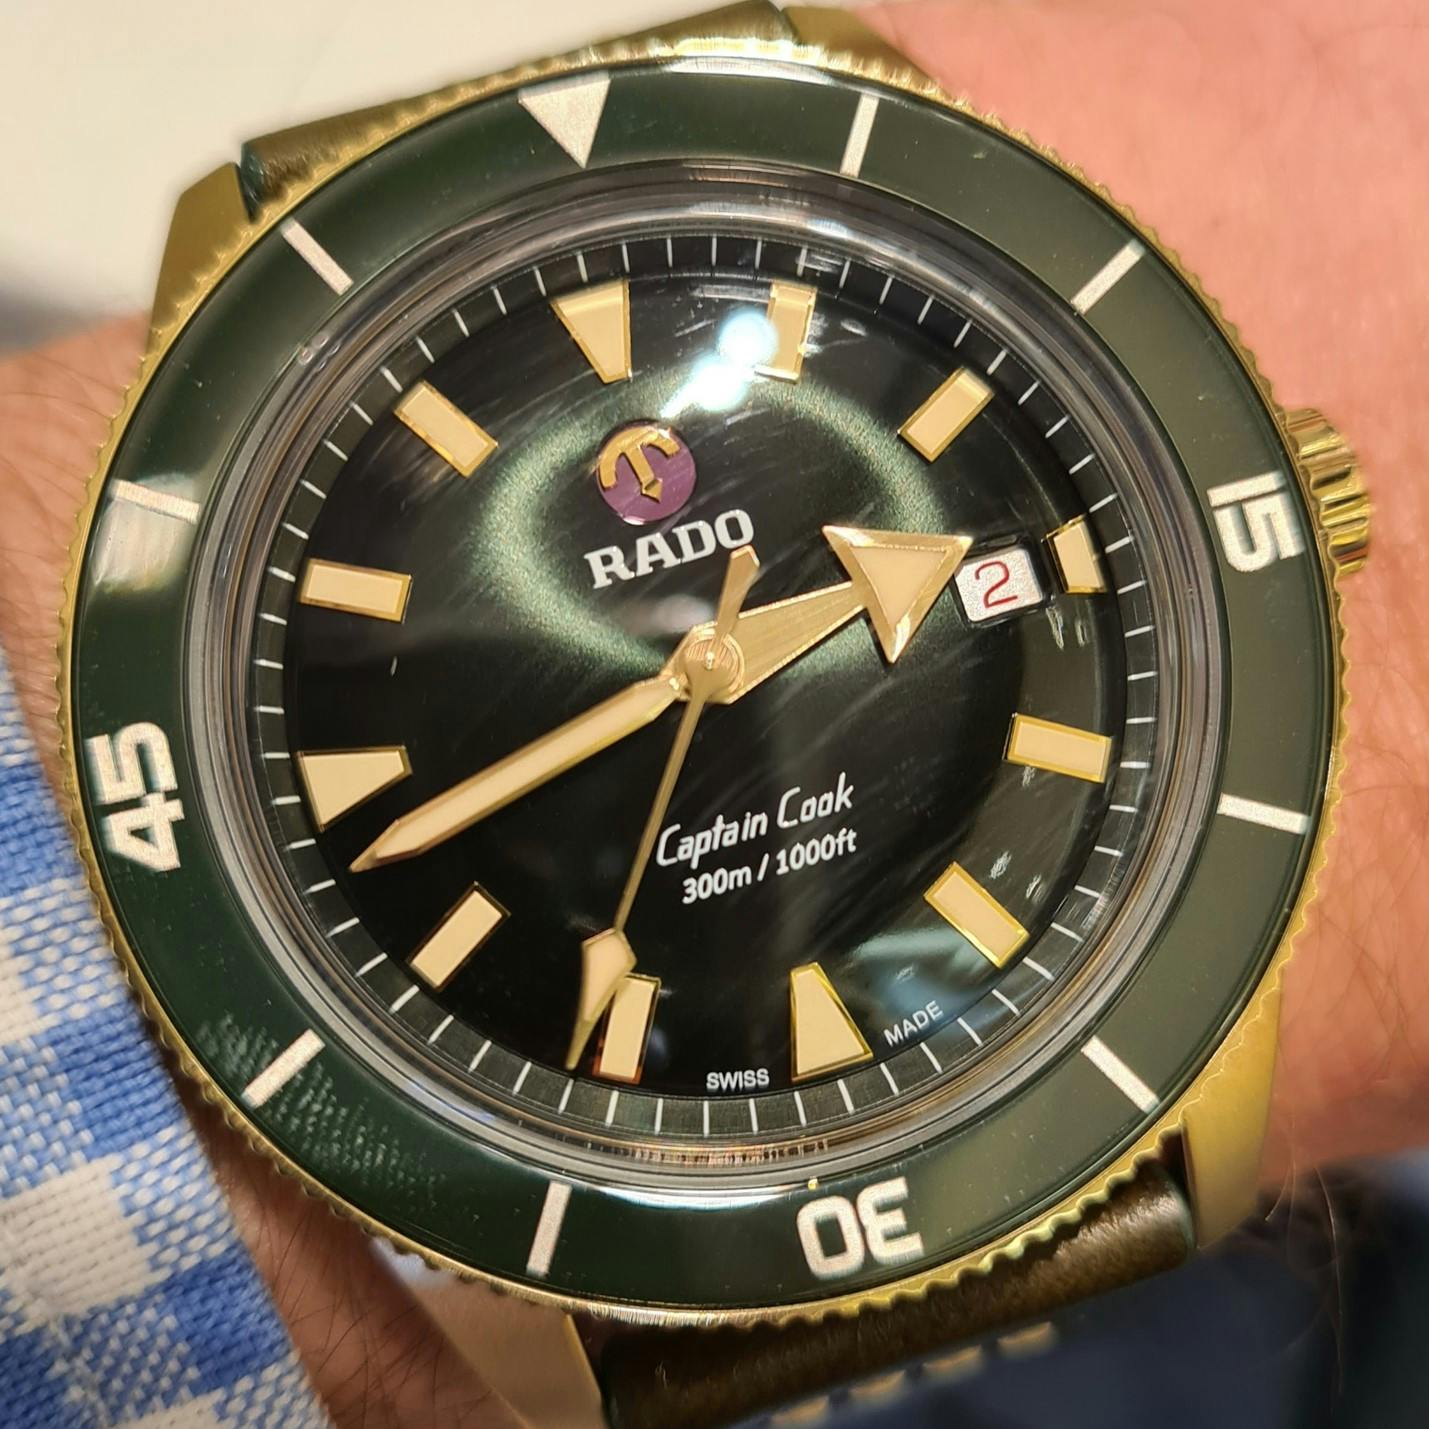 The Rado Captain Cook, which is an example of many current design trends in the watch world; that of Green watches with green bezels (the turning part around the outside) the re-issuance of a historic model, as the Captain Cook was first launched in 1962. This model is available in three different cases; steel, bronze and ceramic, following the trend for more case variety across watch ranges.